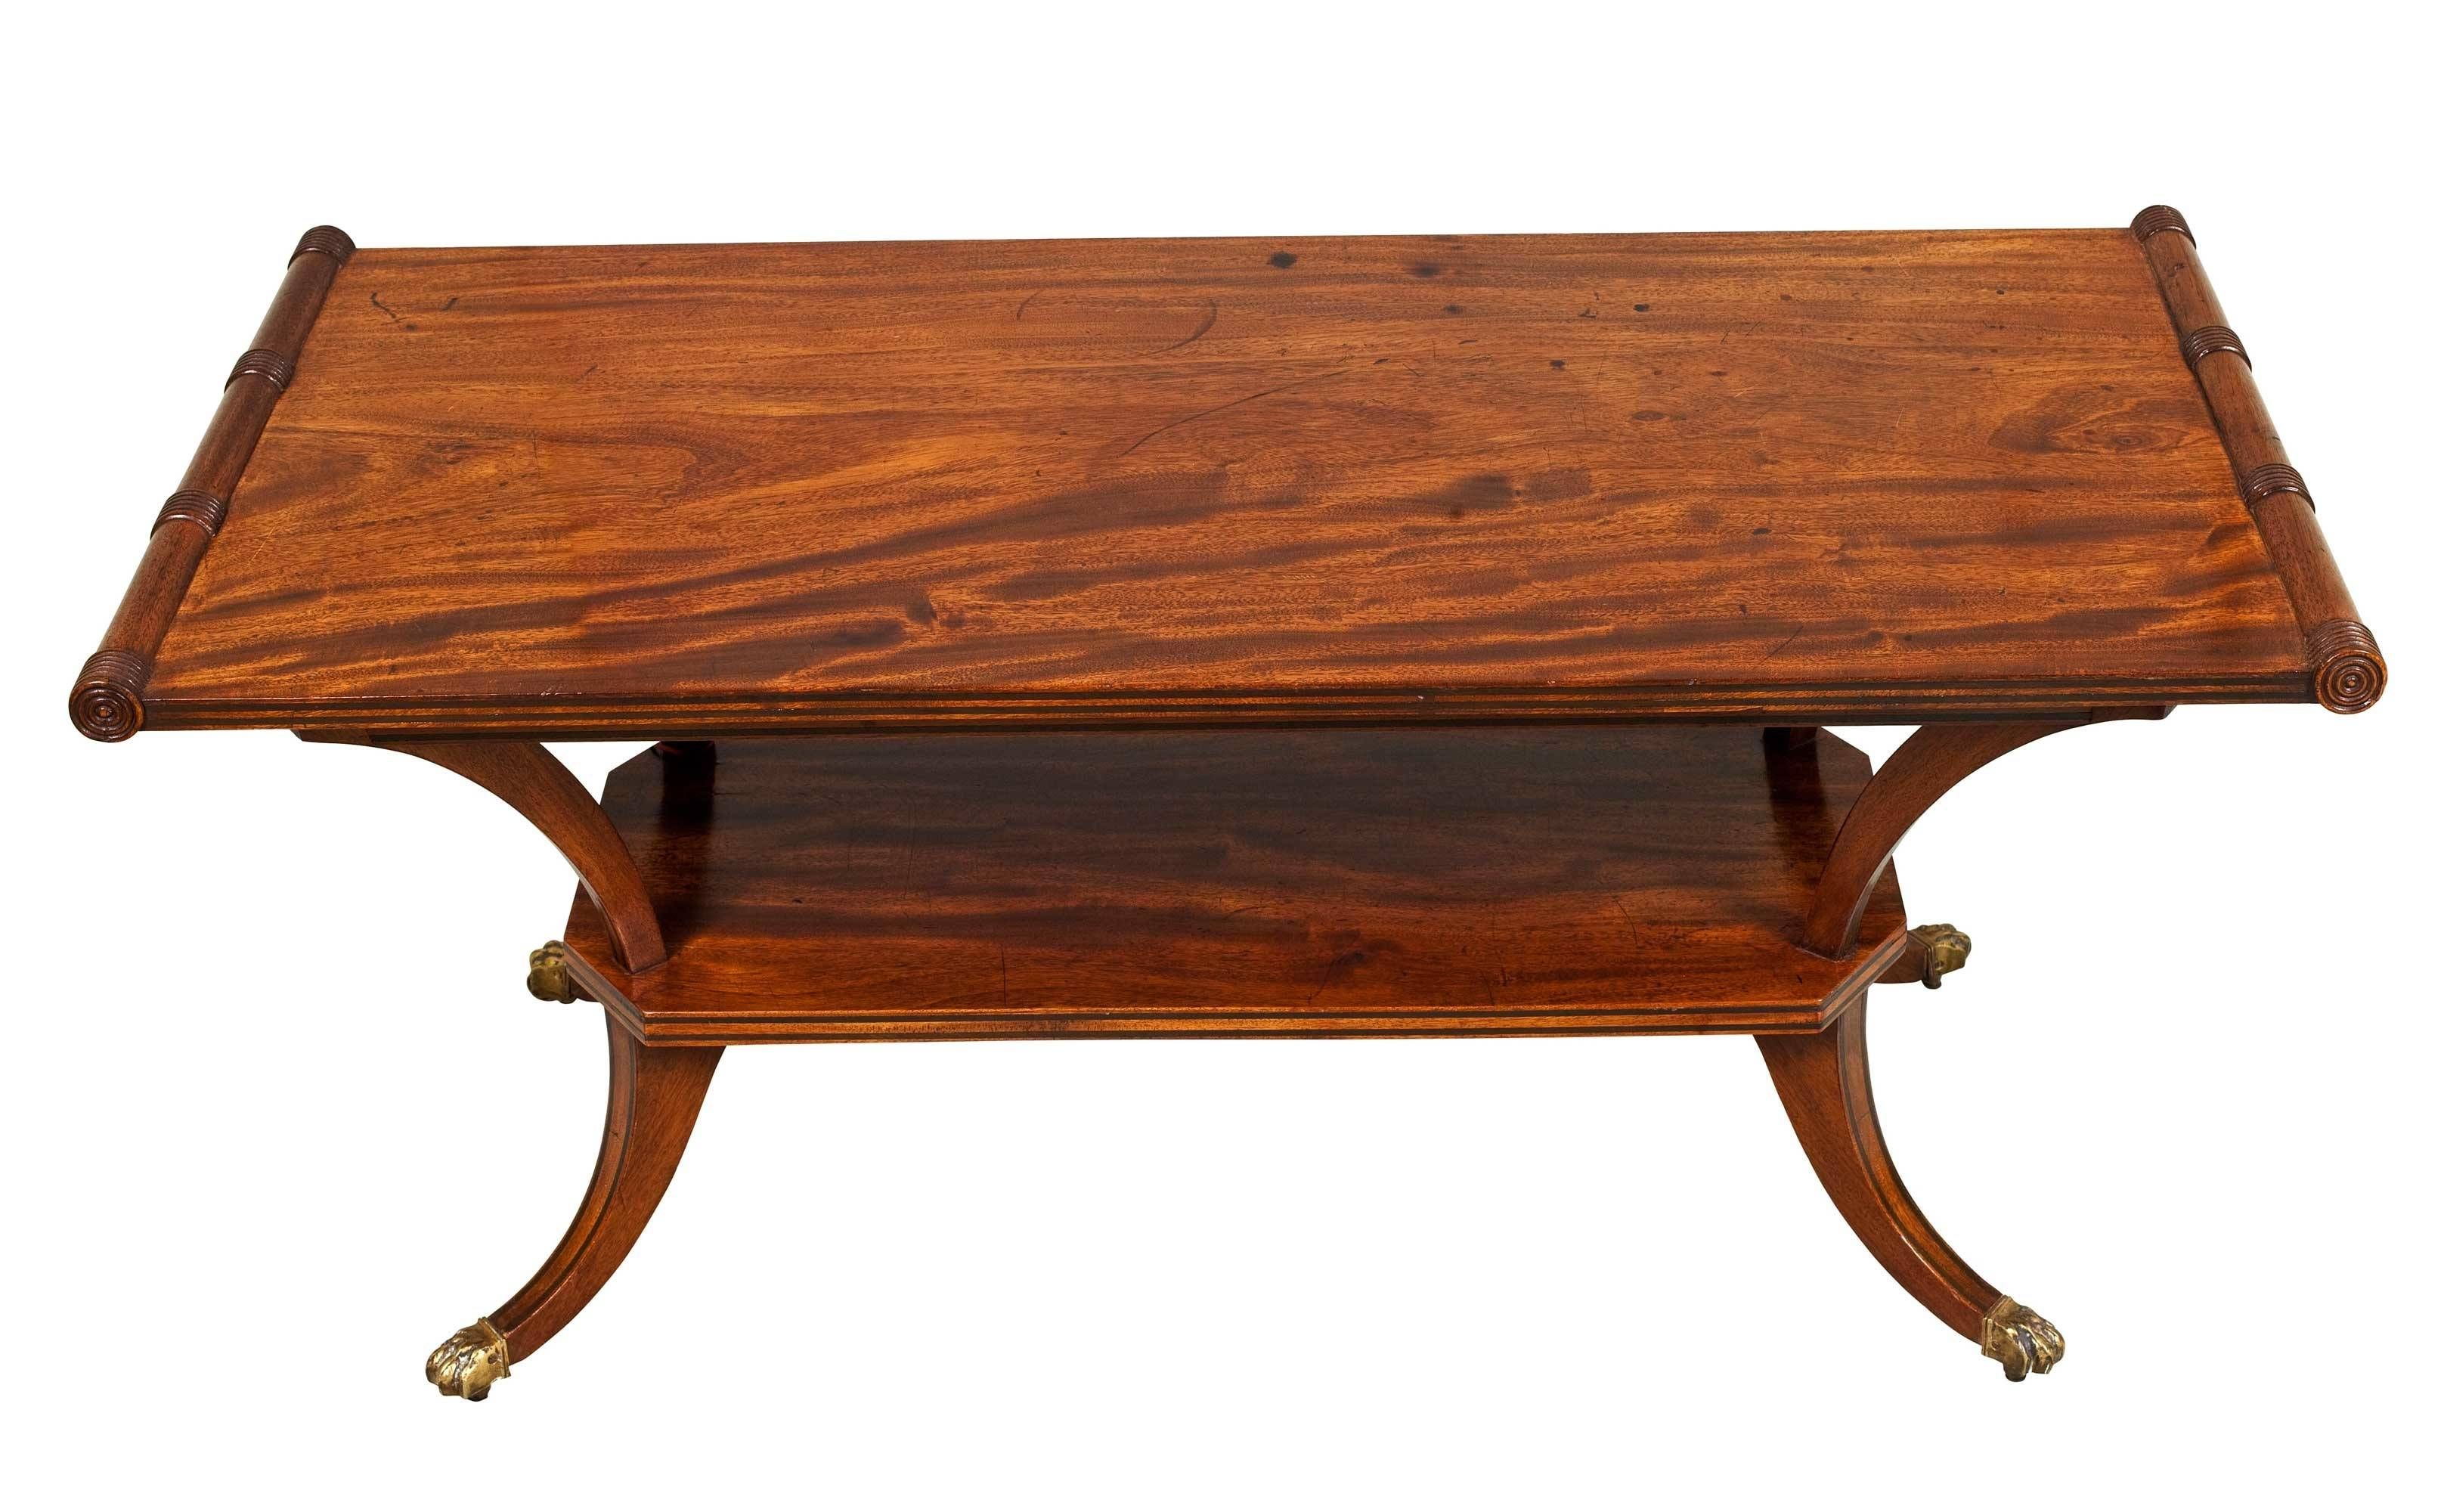 Decoration Mahogany Coffee Table With Mahogany Finish Queen Ann Pertaining To Mahogany Coffee Tables (View 18 of 30)